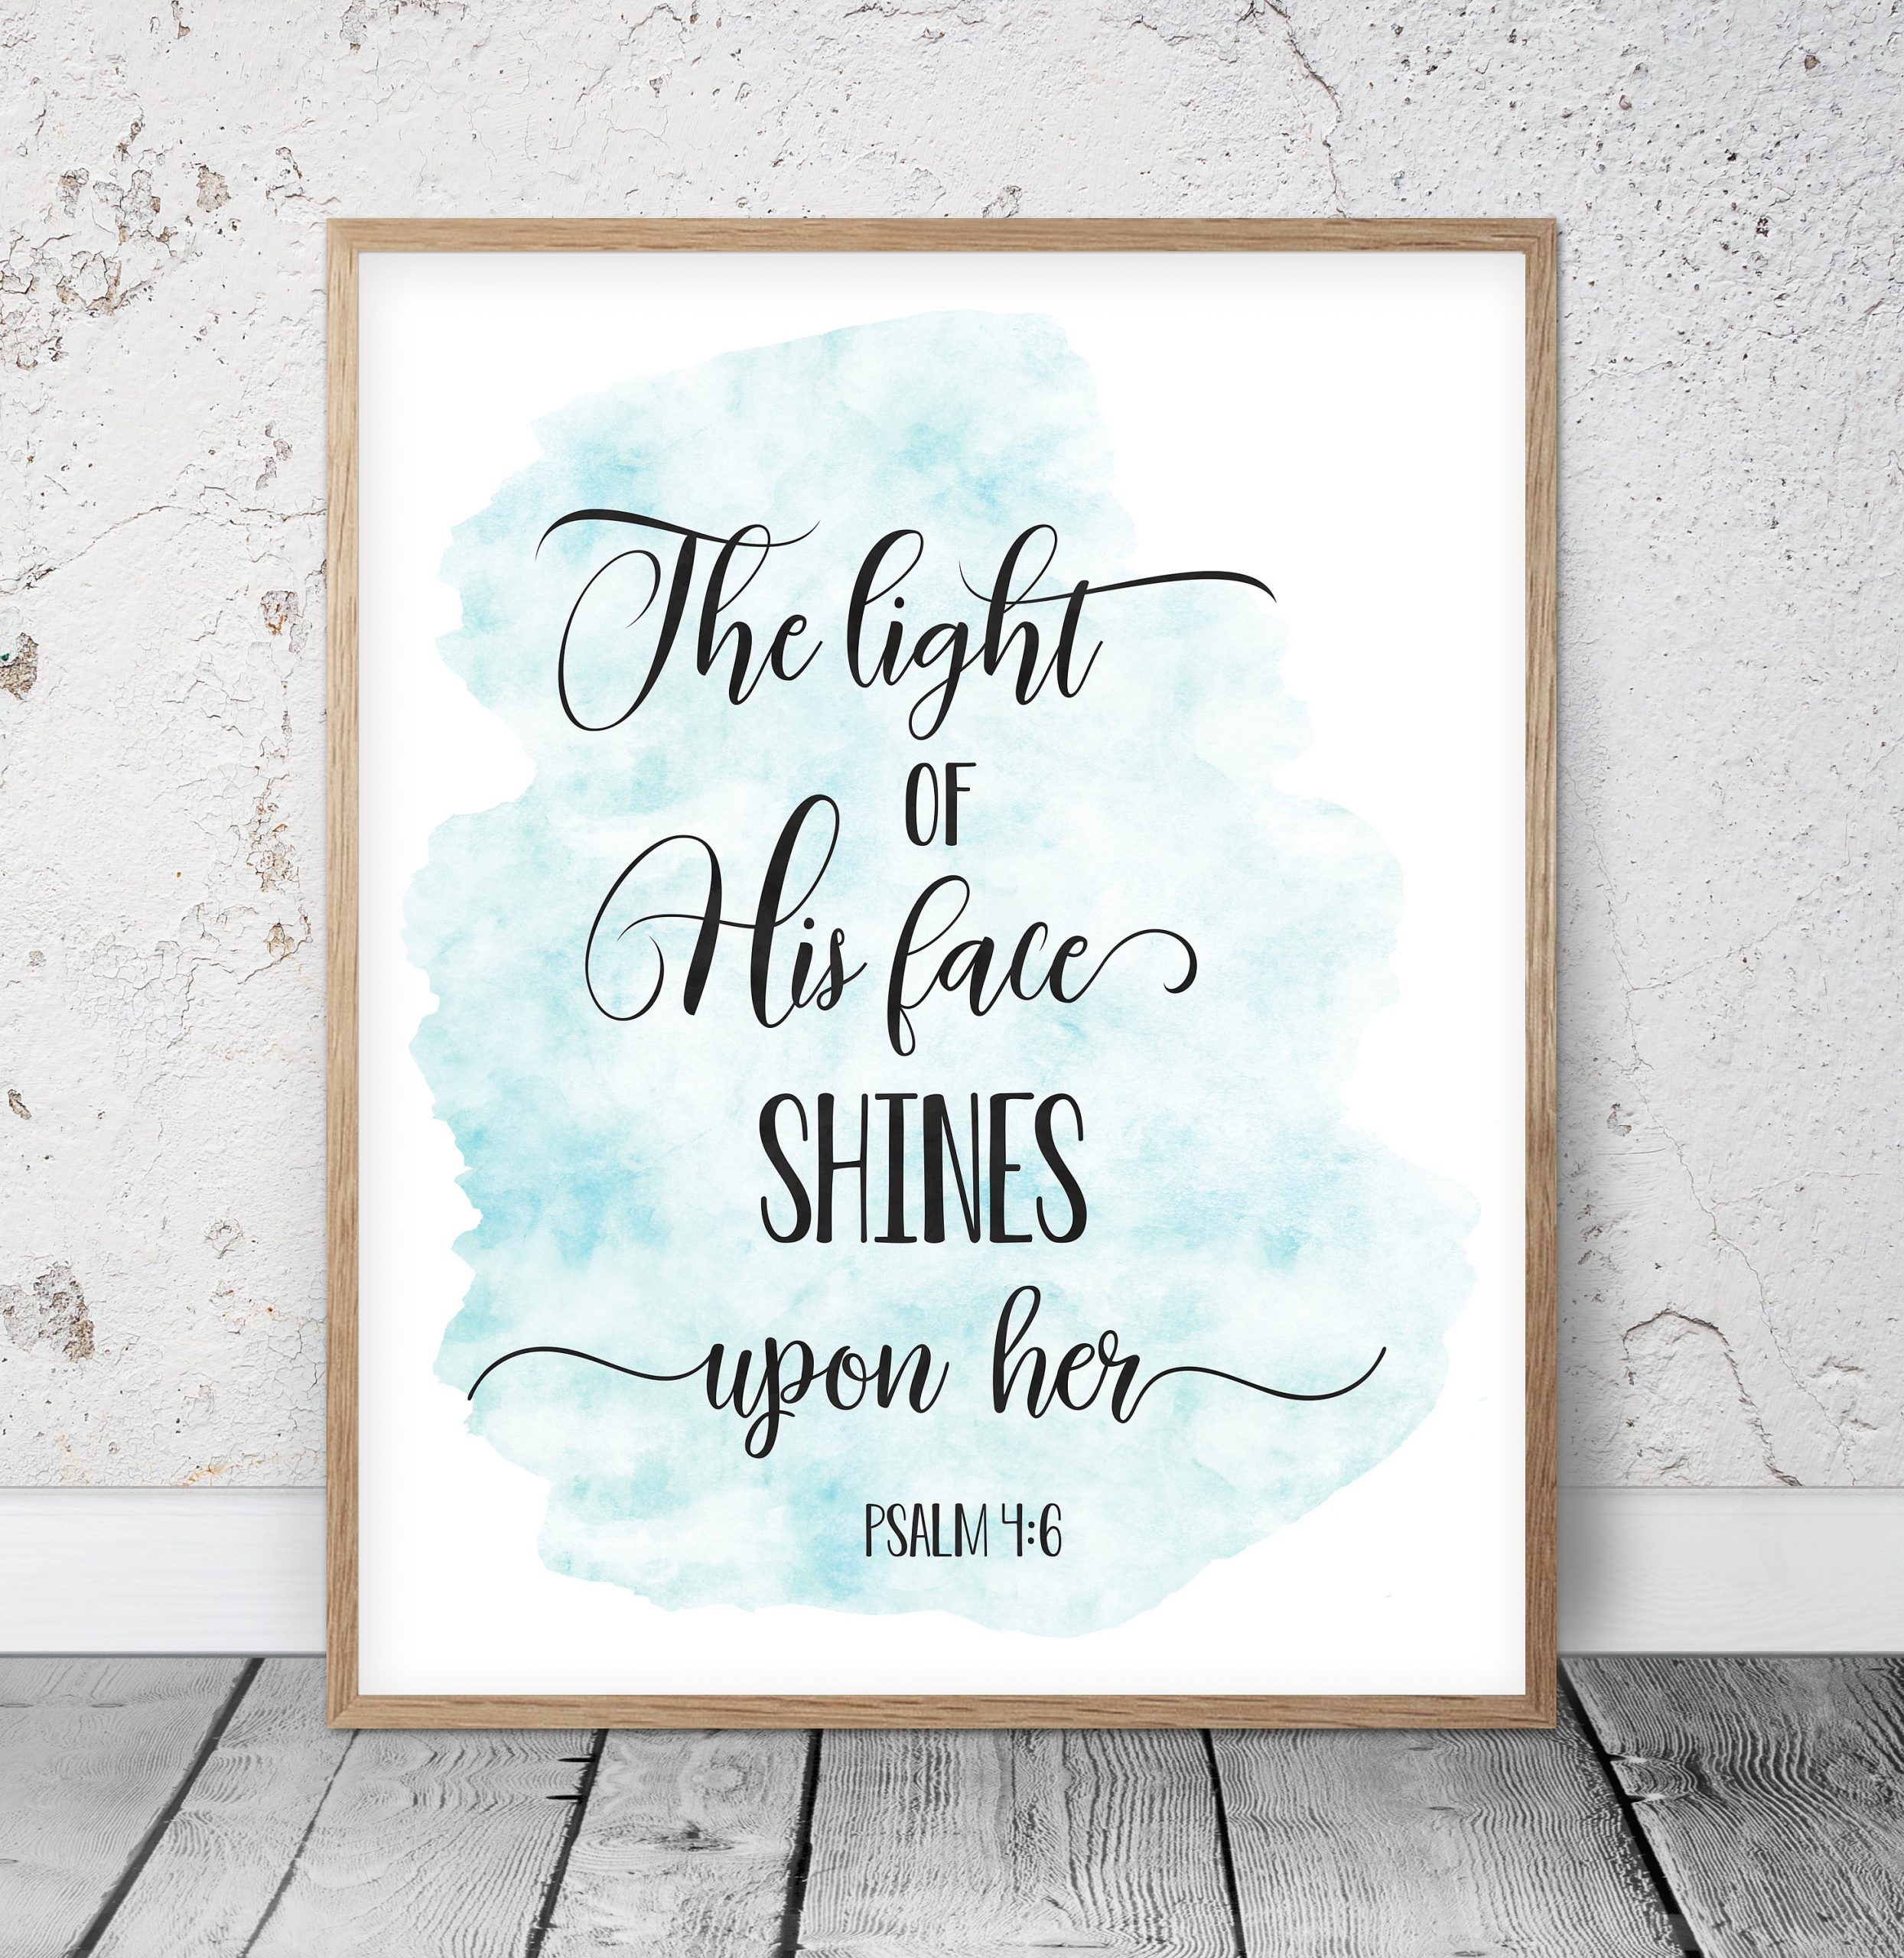 The Light Of His Face Shines Upon Her, Psalm 4:6, Bible Verse Printable, Nursery Decor Wall Art